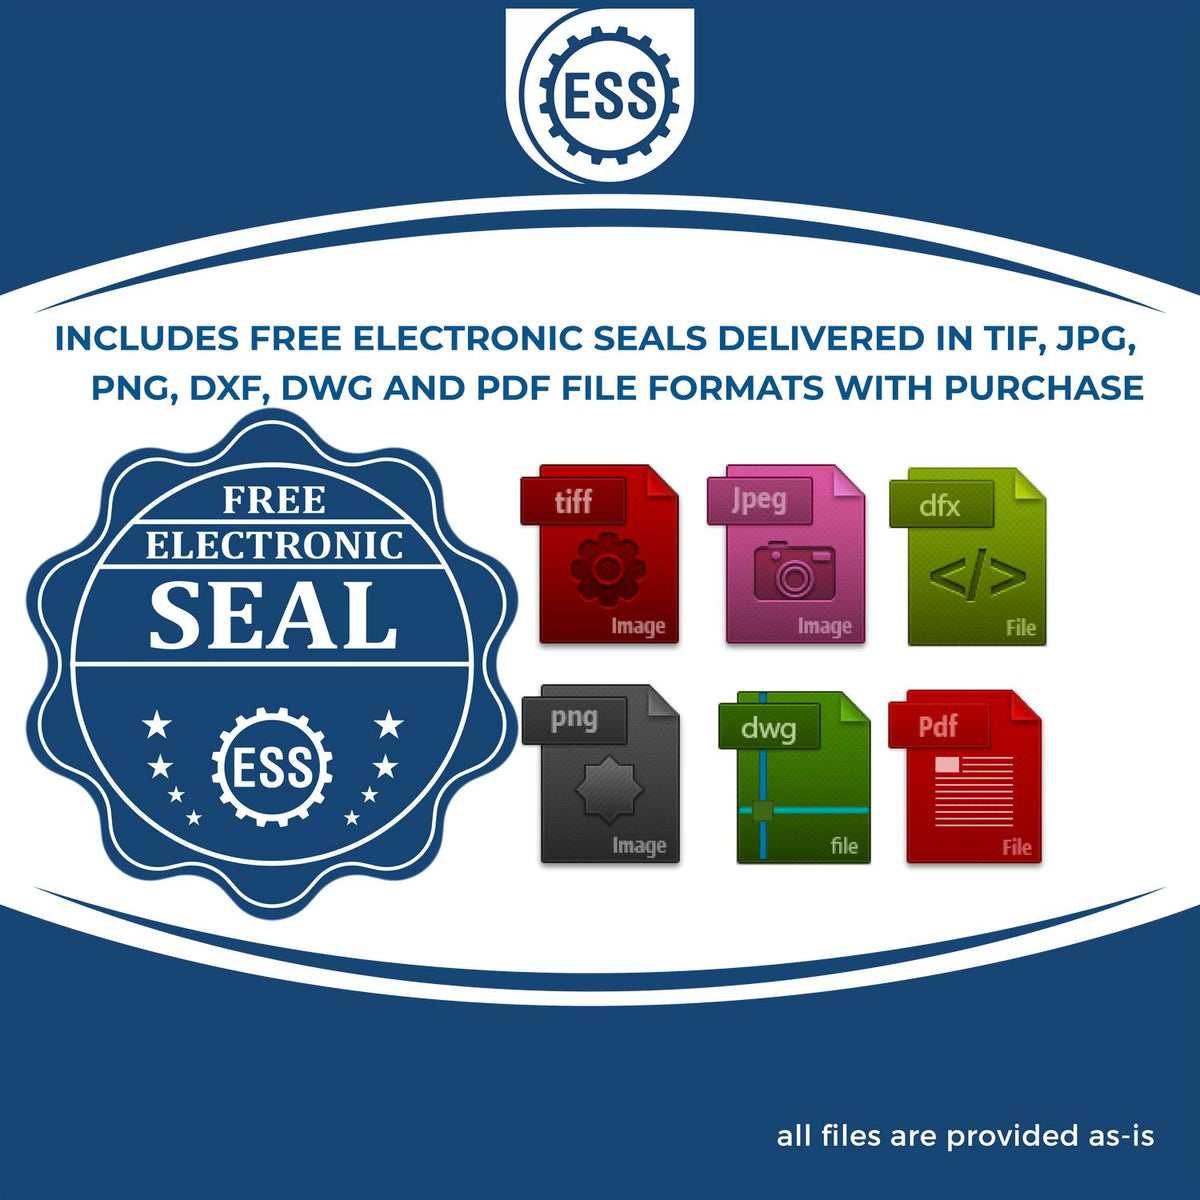 An infographic for the free electronic seal for the Premium MaxLight Pre-Inked Iowa Geology Stamp illustrating the different file type icons such as DXF, DWG, TIF, JPG and PNG.